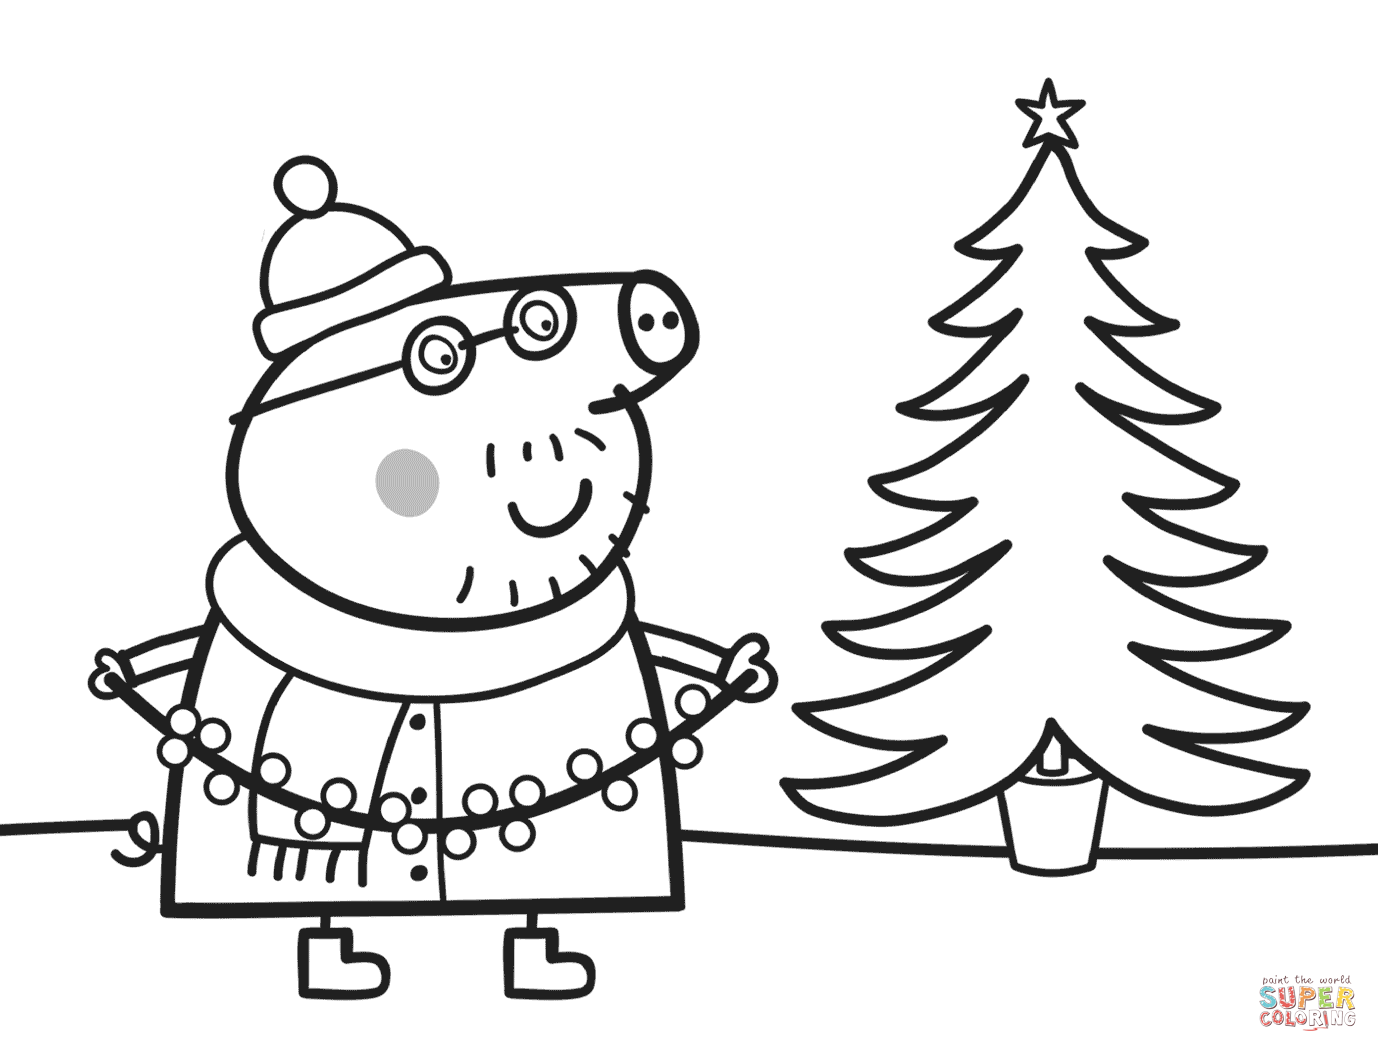 Daddy pig decorates xmas tree coloring page free printable coloring pages